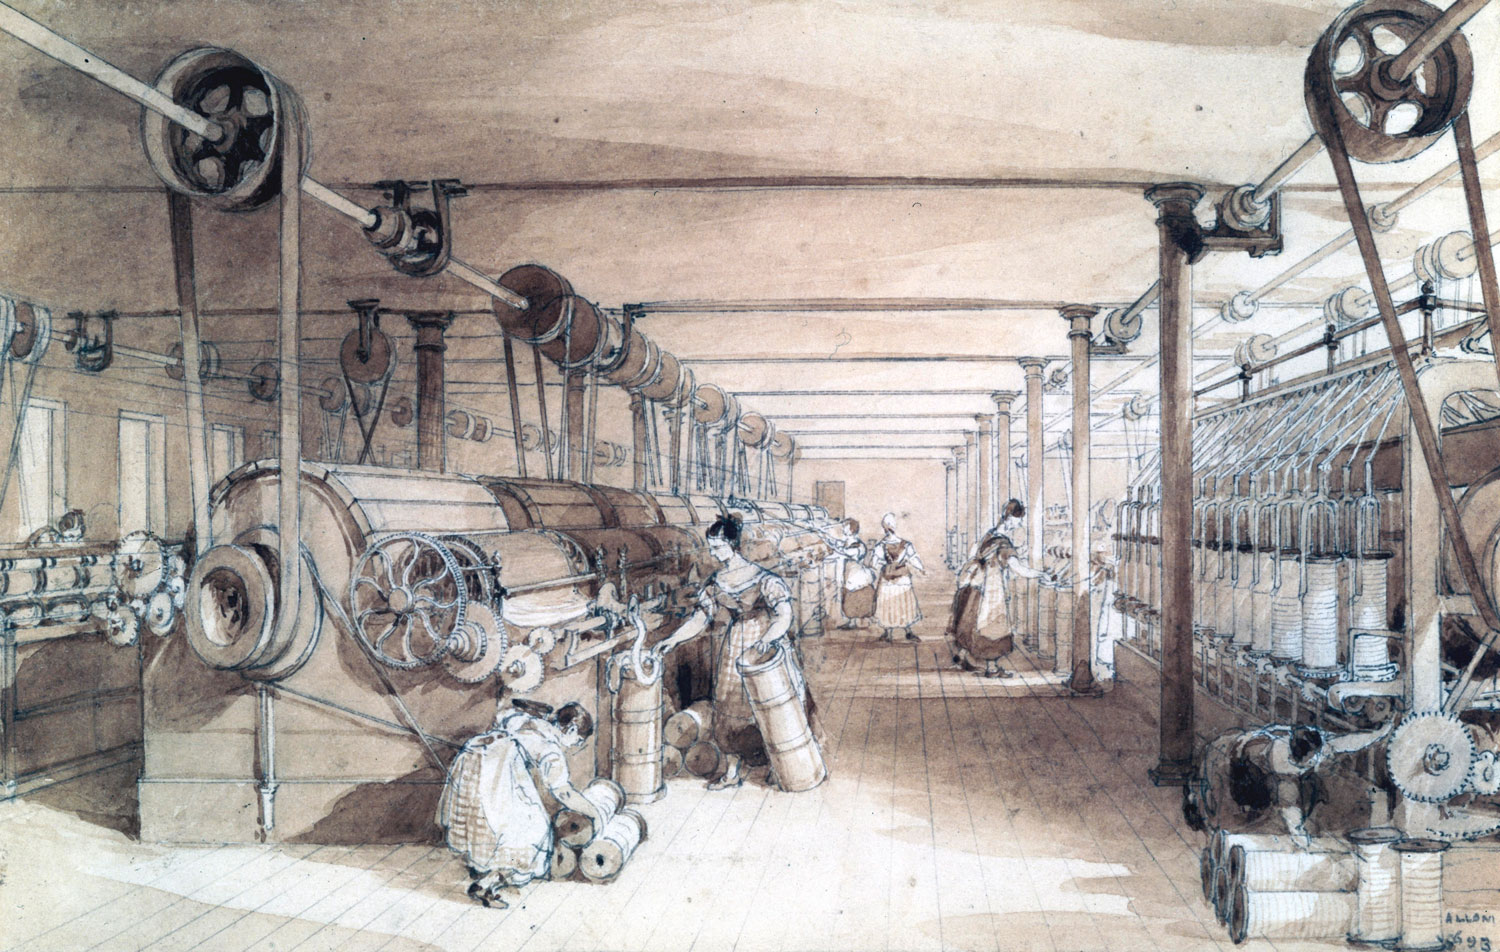 Illustration of workers operating carding and drawing machines in Swainson Birley cotton mill, about 1834.